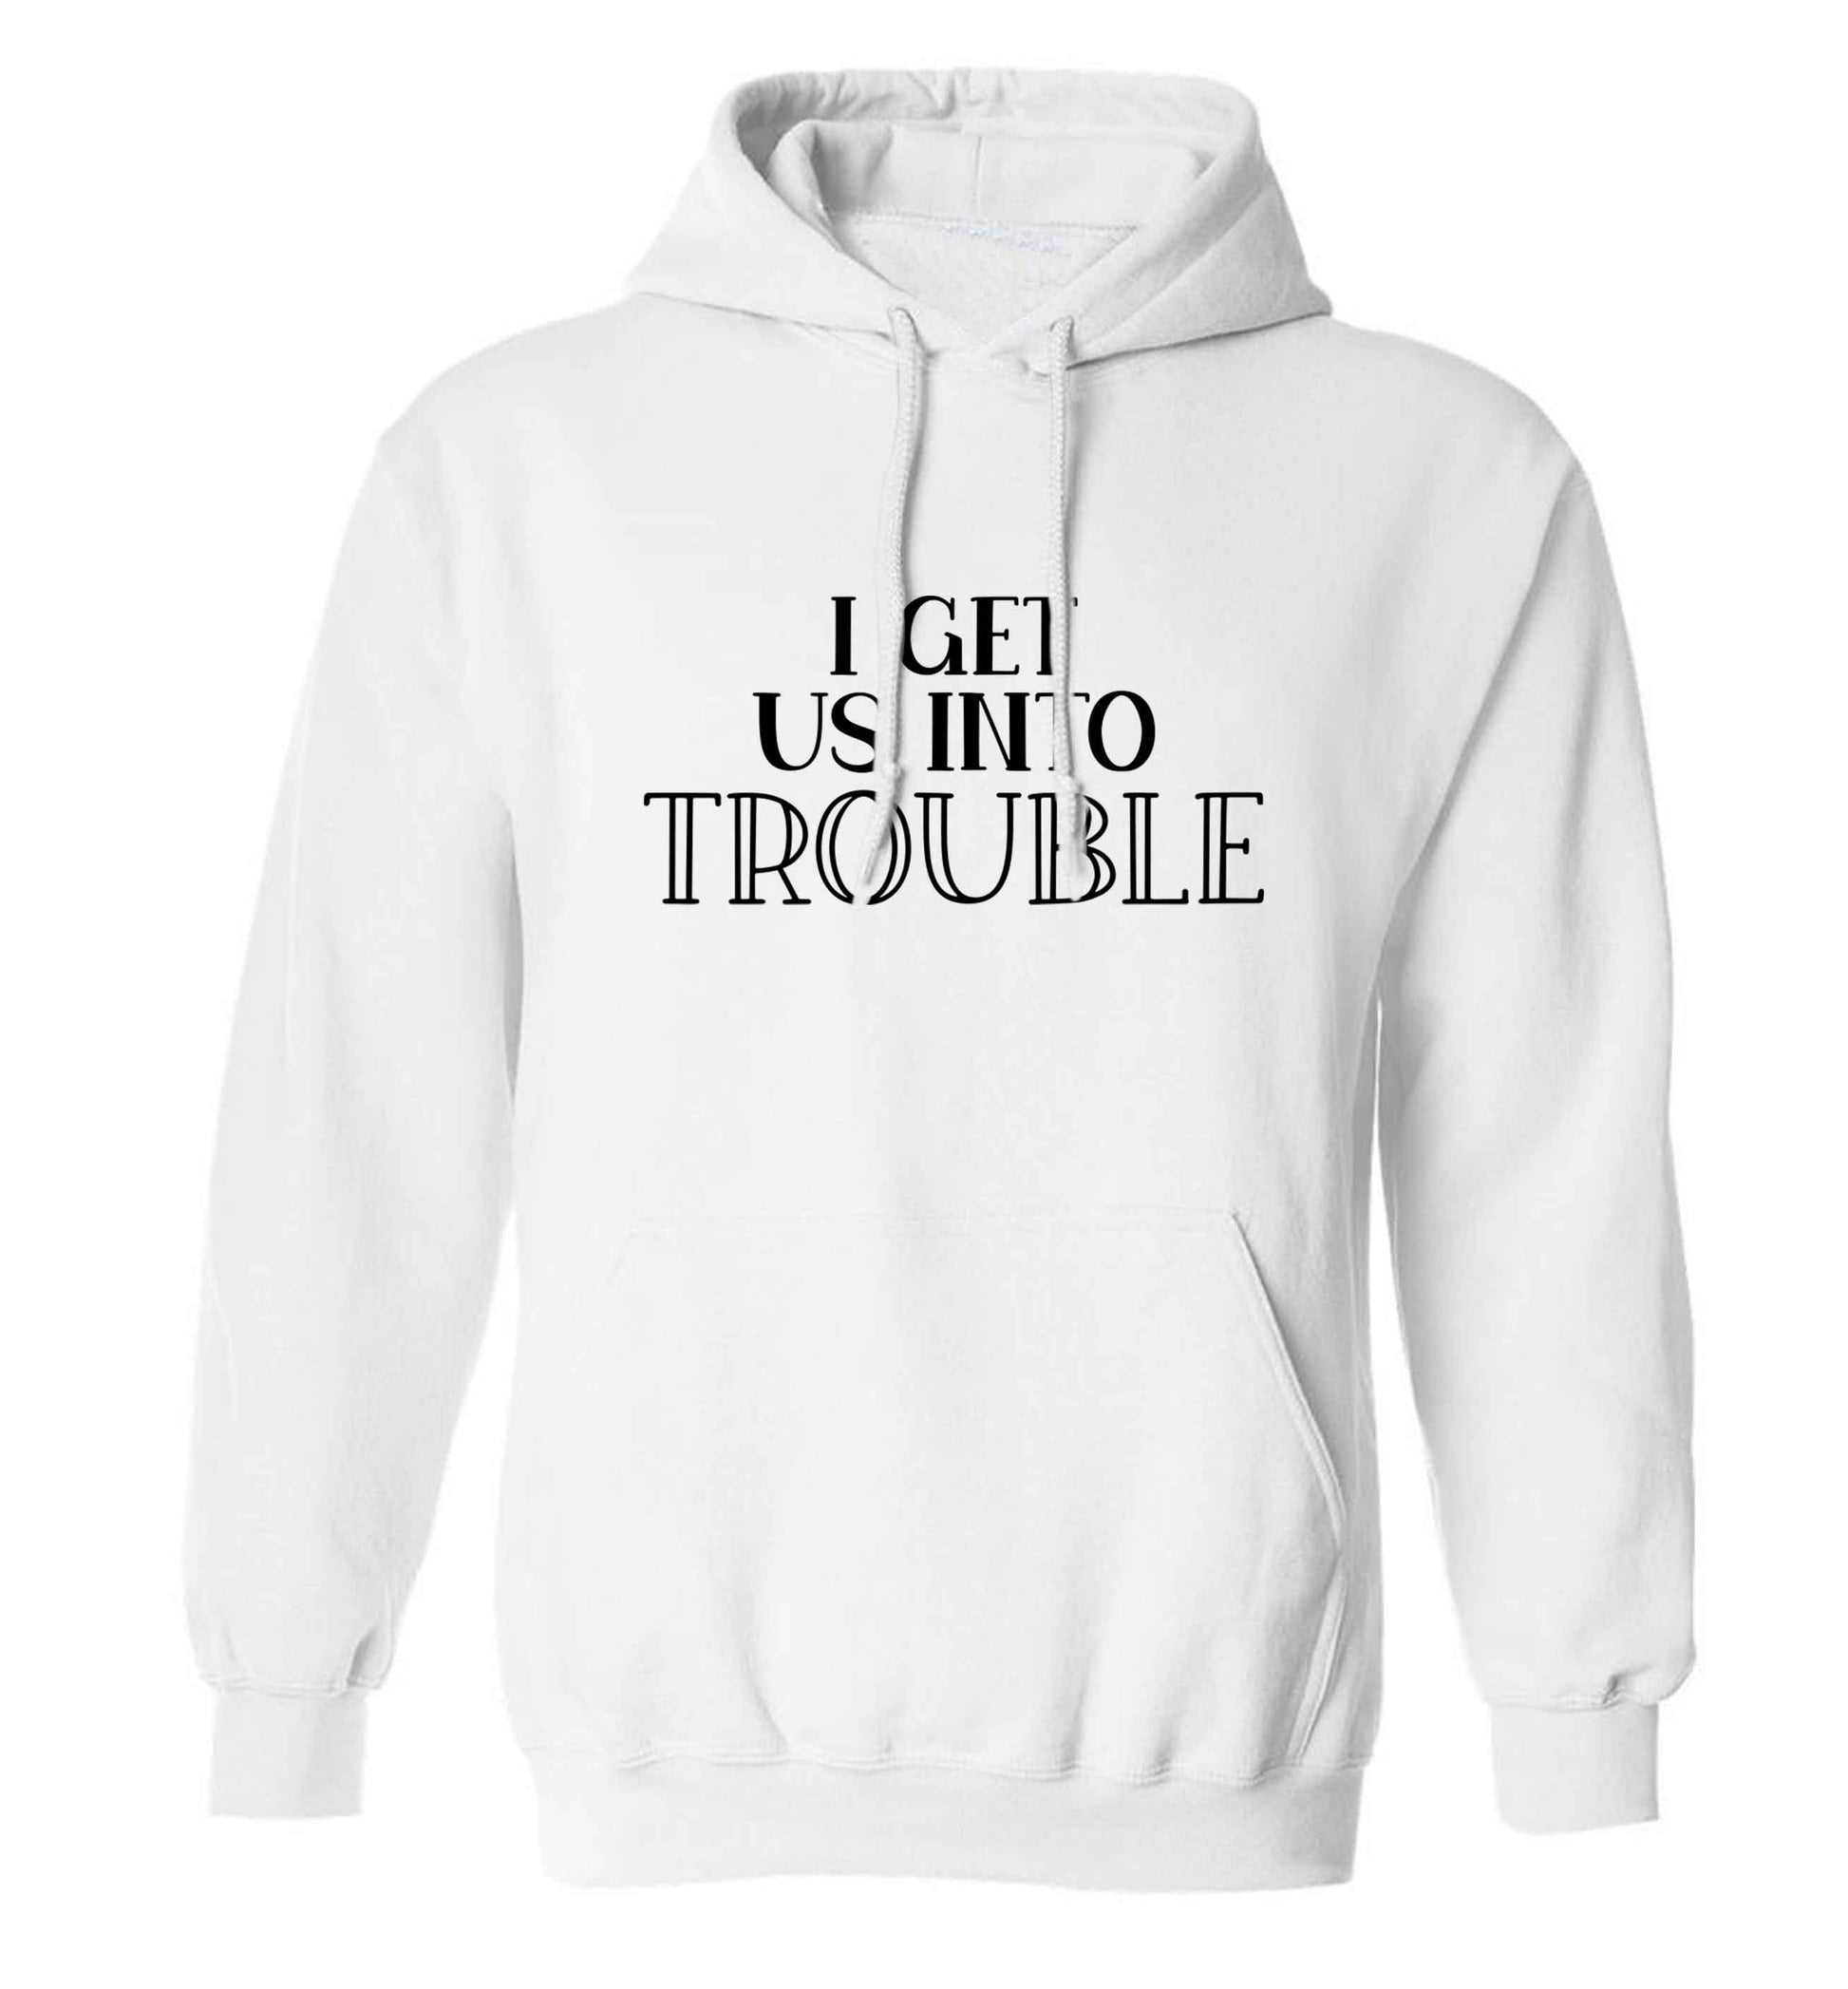 I get us into trouble adults unisex white hoodie 2XL